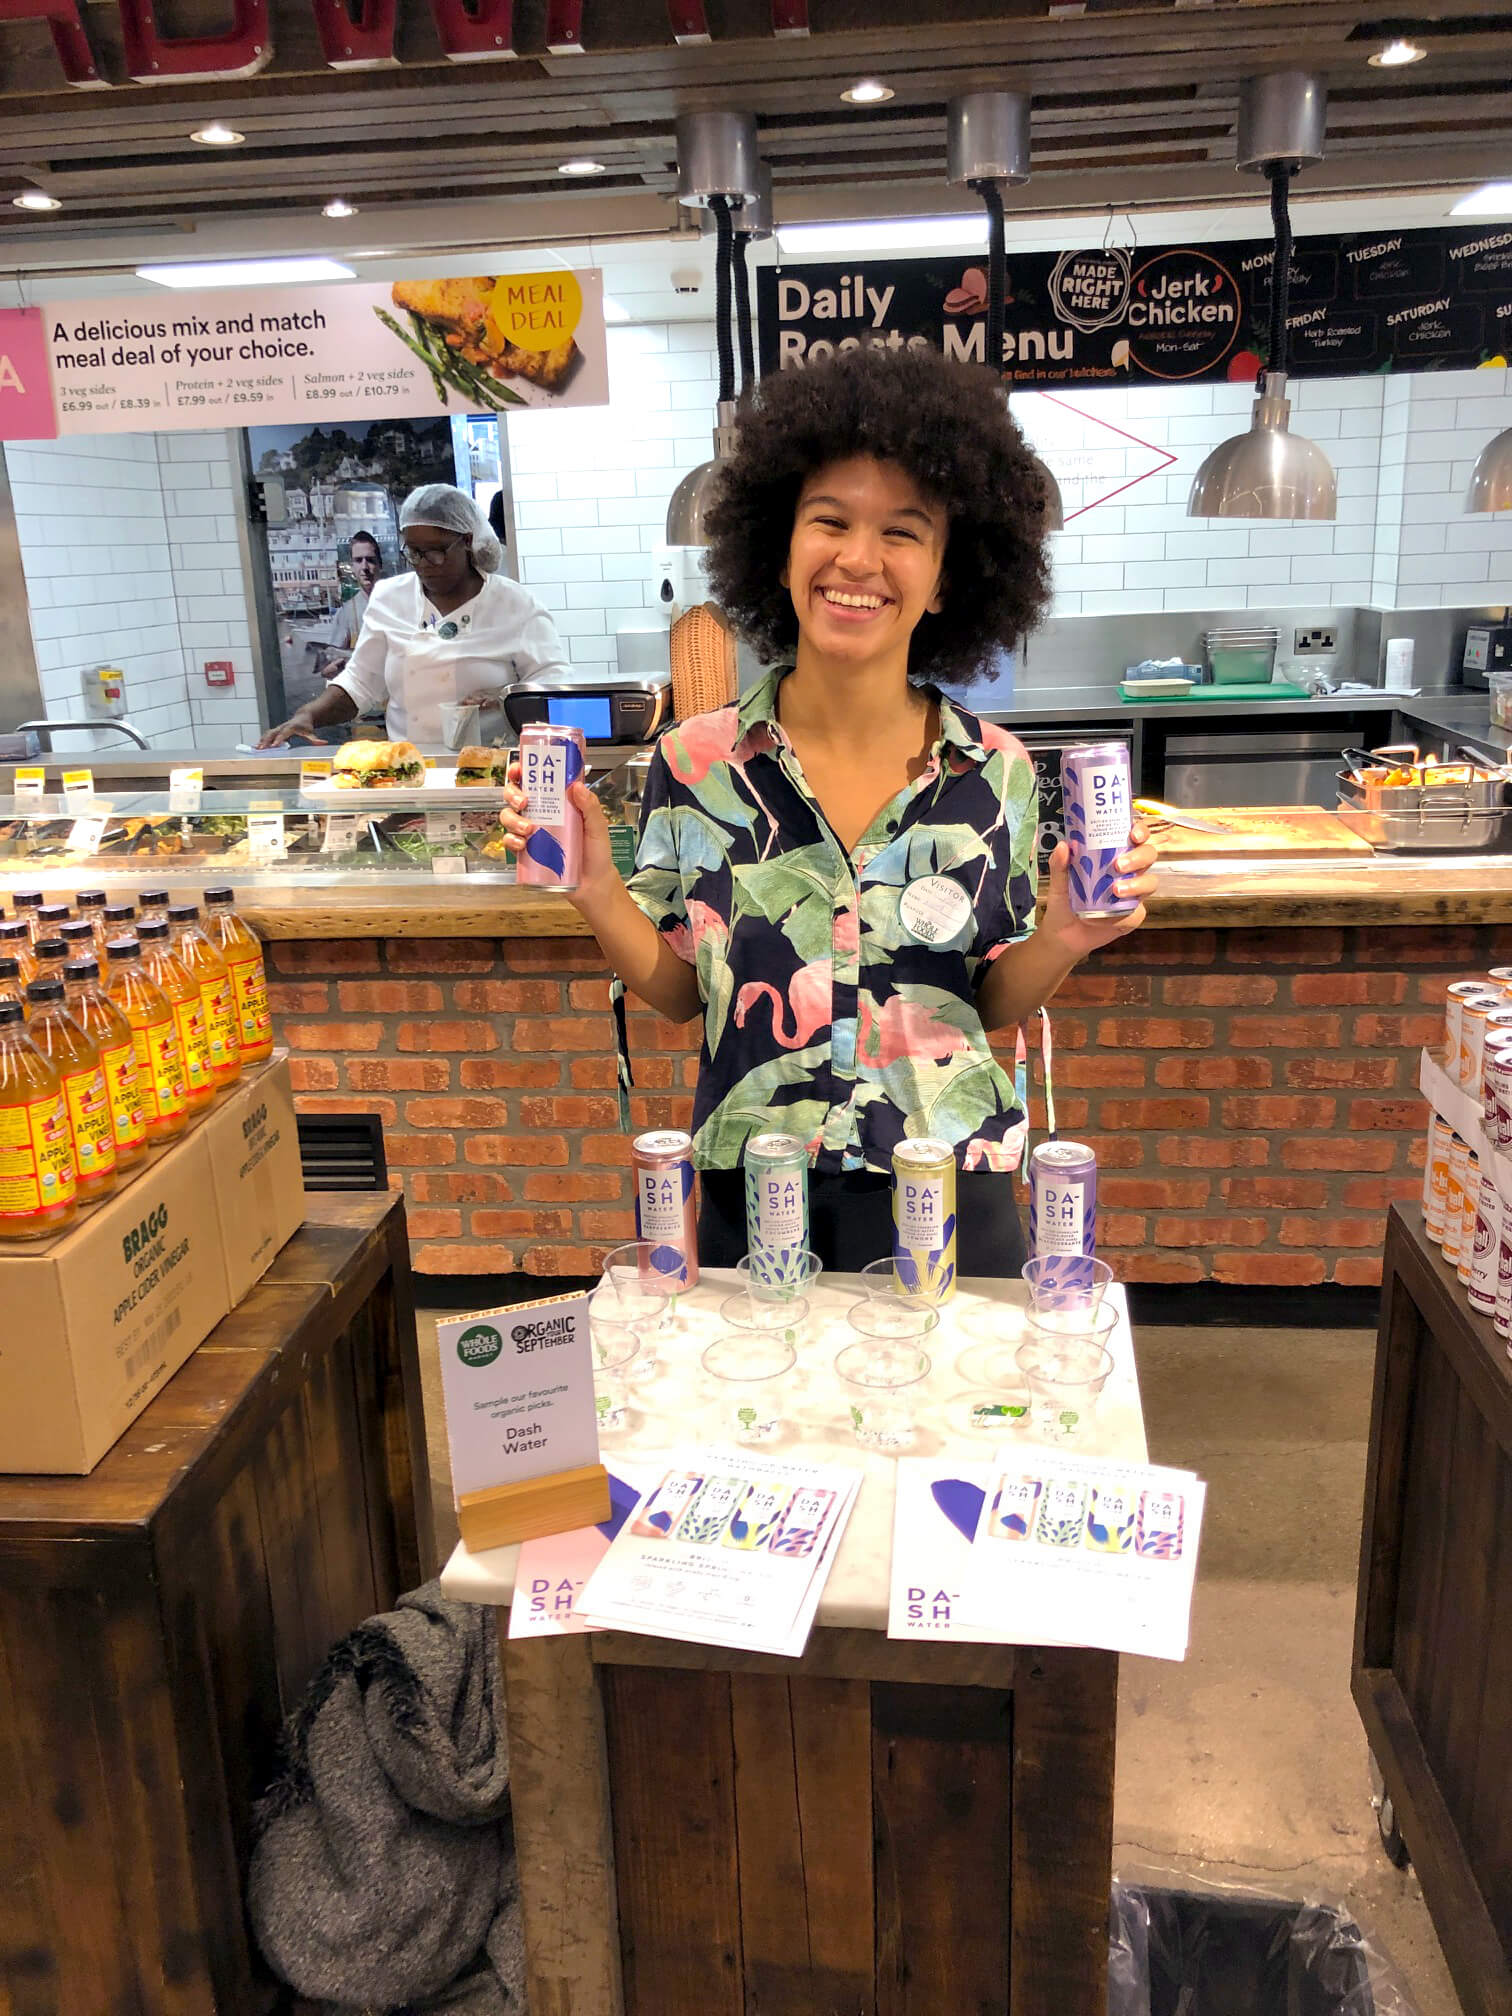 Mixed-race young woman with afro hair smiling whilst standing behind a table. She is holding 2 cans of ‘Dash’ sparkling water.